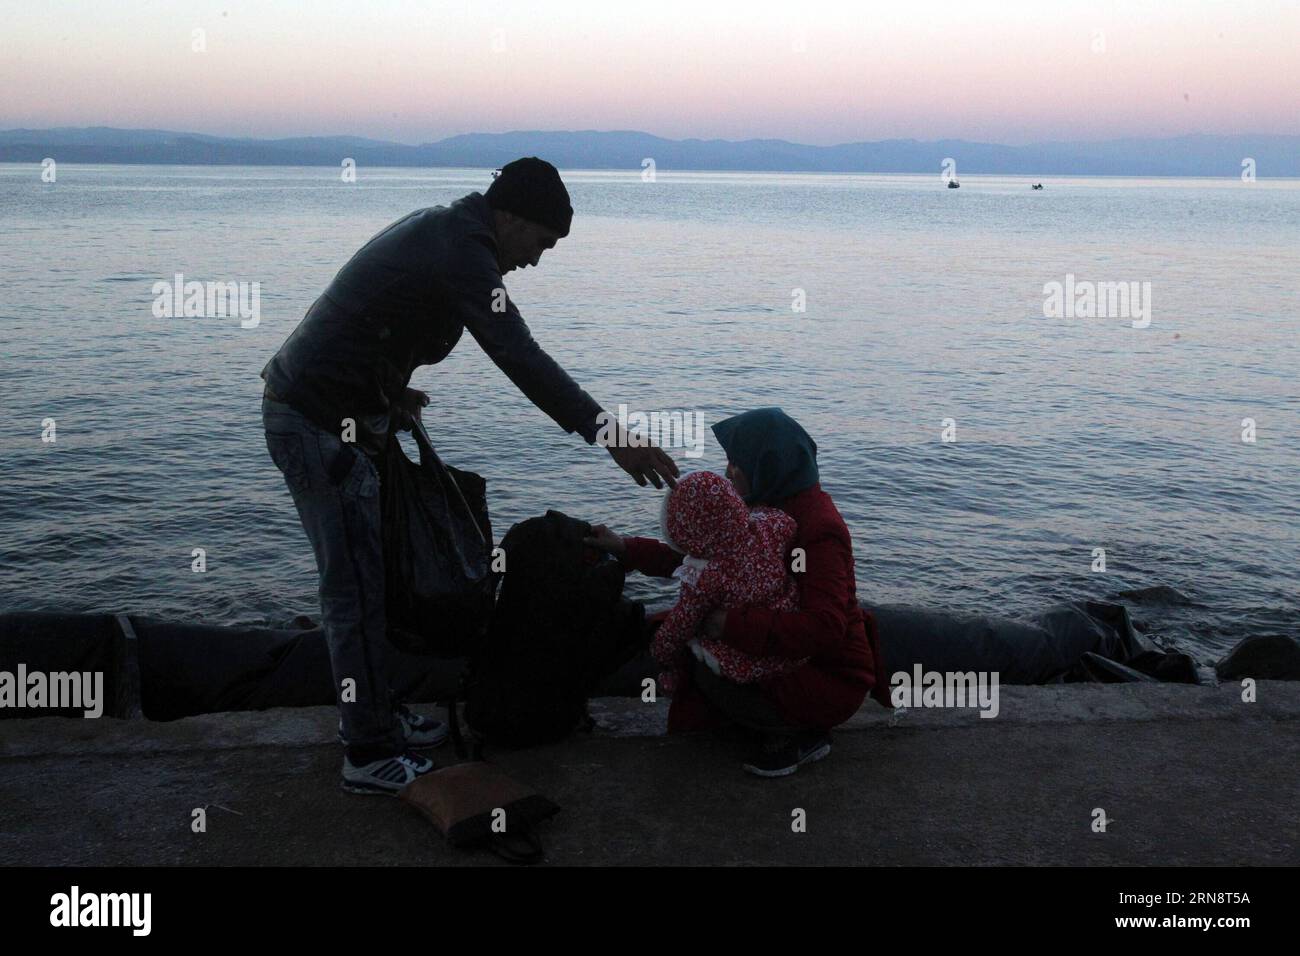 (151104) -- ATHENS, Nov. 4, 2015 -- Refugees arrive at the Greek island of Lesvos after crossing the Aegean Sea from Turkey, Nov. 4, 2015. More than 600,000 refugees have arrived at Greece from the beginning of 2015, with about half of them landing at the Lesvos island, about 260 km northeast of the capital Athens. ) GREECE-LESVOS-REFUGEES MariosxLolos PUBLICATIONxNOTxINxCHN   Athens Nov 4 2015 Refugees Arrive AT The Greek Iceland of Lesvos After Crossing The Aegean Sea from Turkey Nov 4 2015 More than 600 000 Refugees have arrived AT Greece from The BEGINNING of 2015 With About Half of THEM L Stock Photo